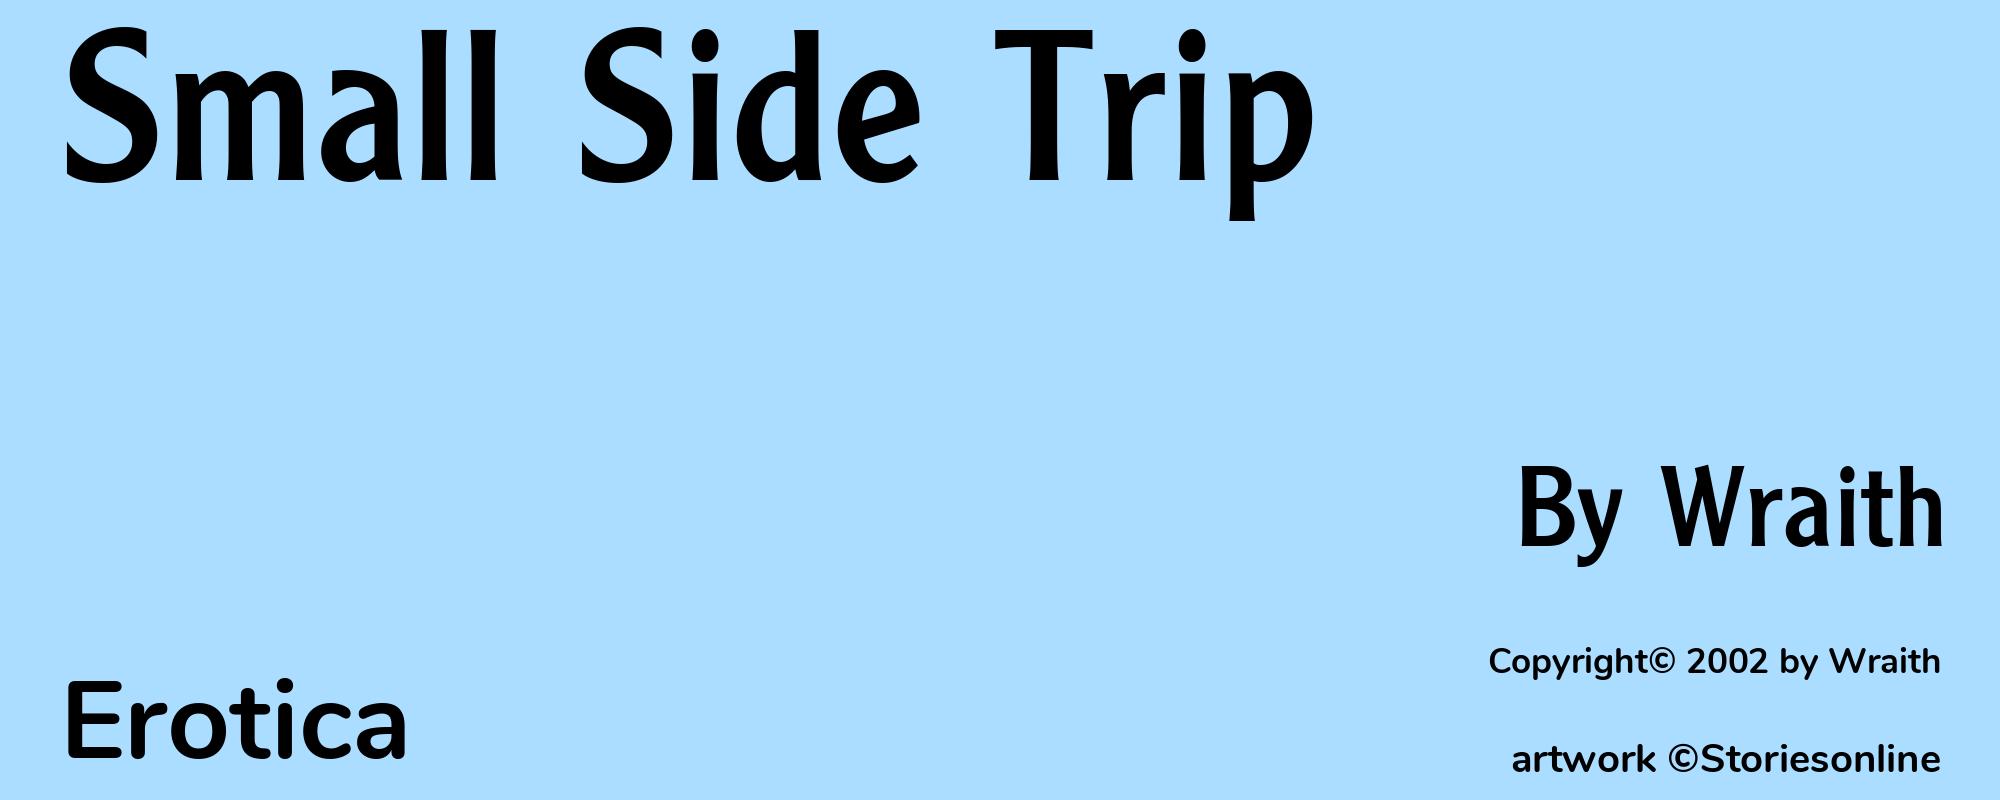 Small Side Trip - Cover